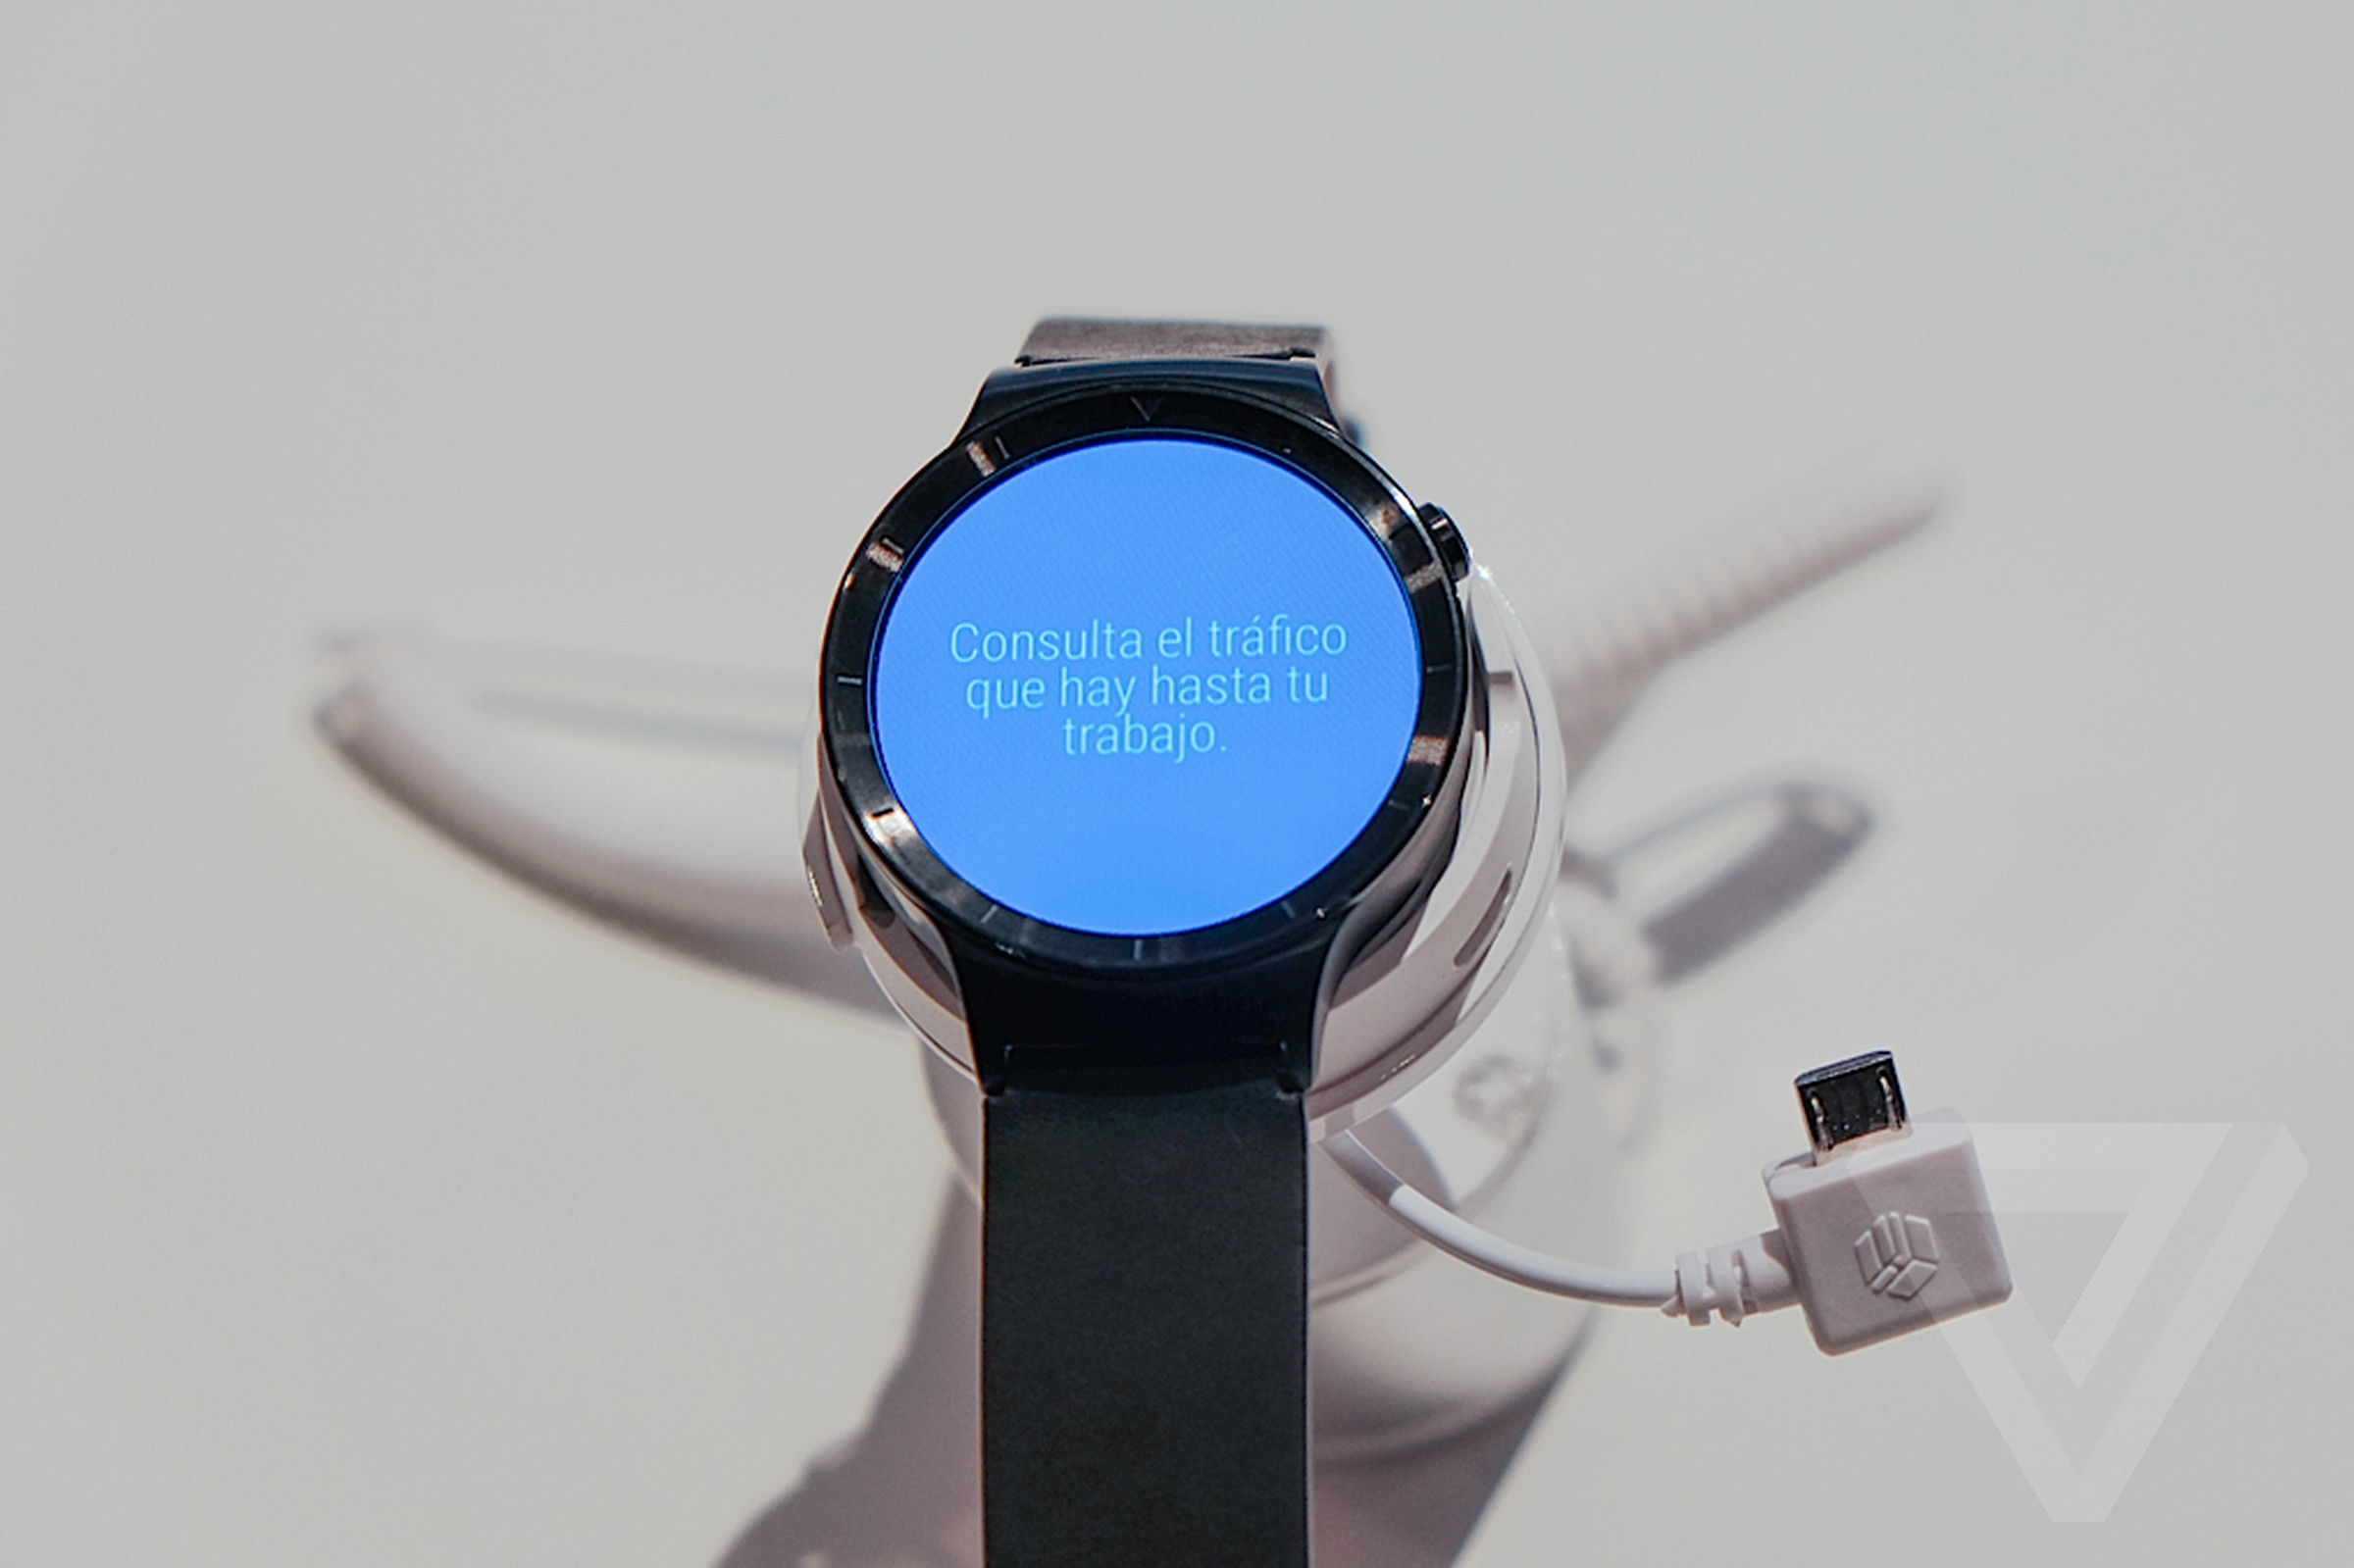 Huawei Watch hands-on photos